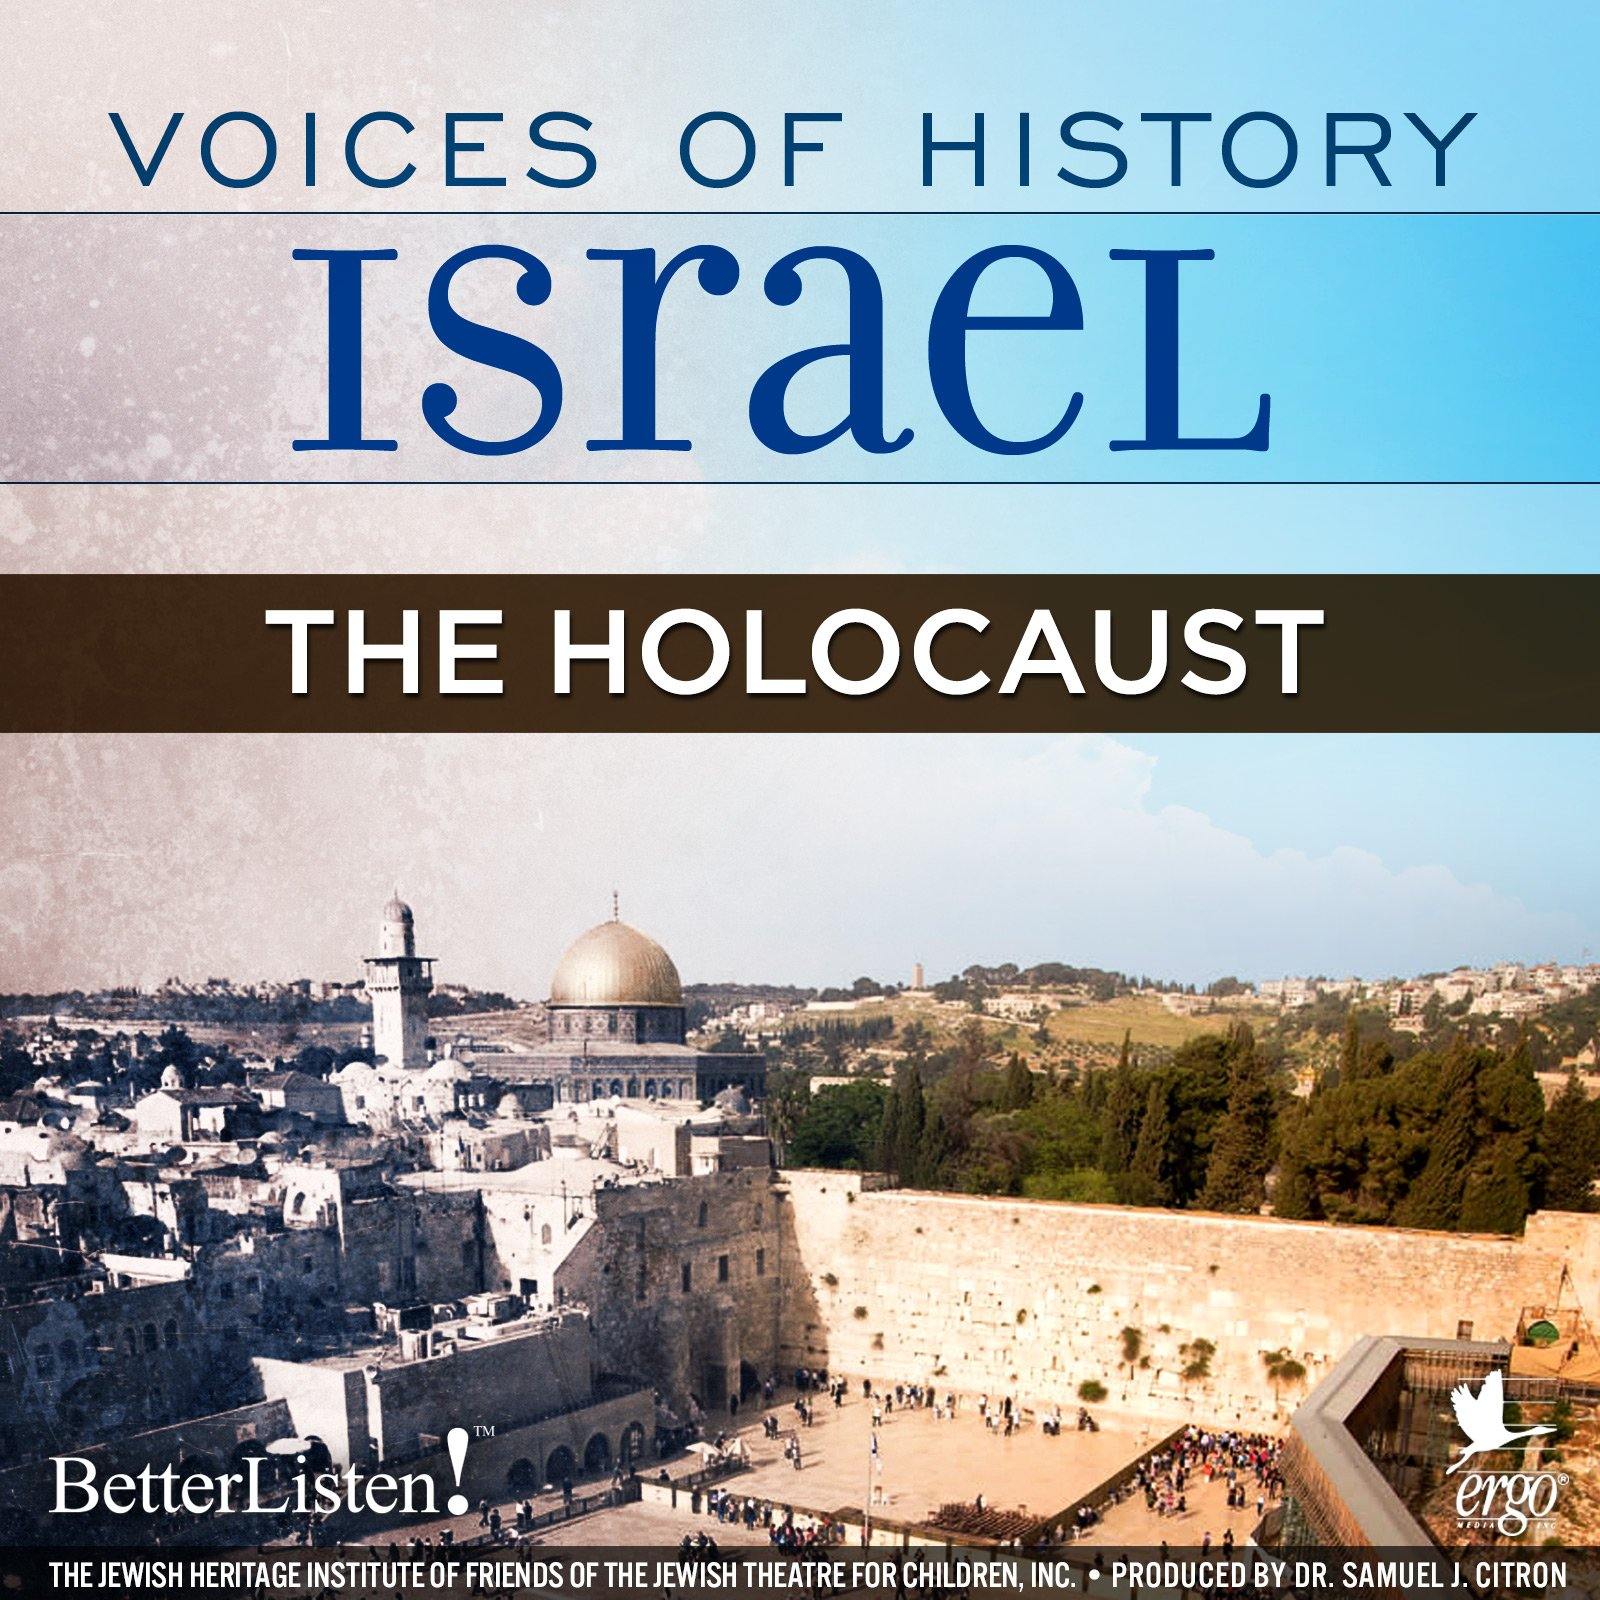 Voices of History Israel: The Holocaust - BetterListen!